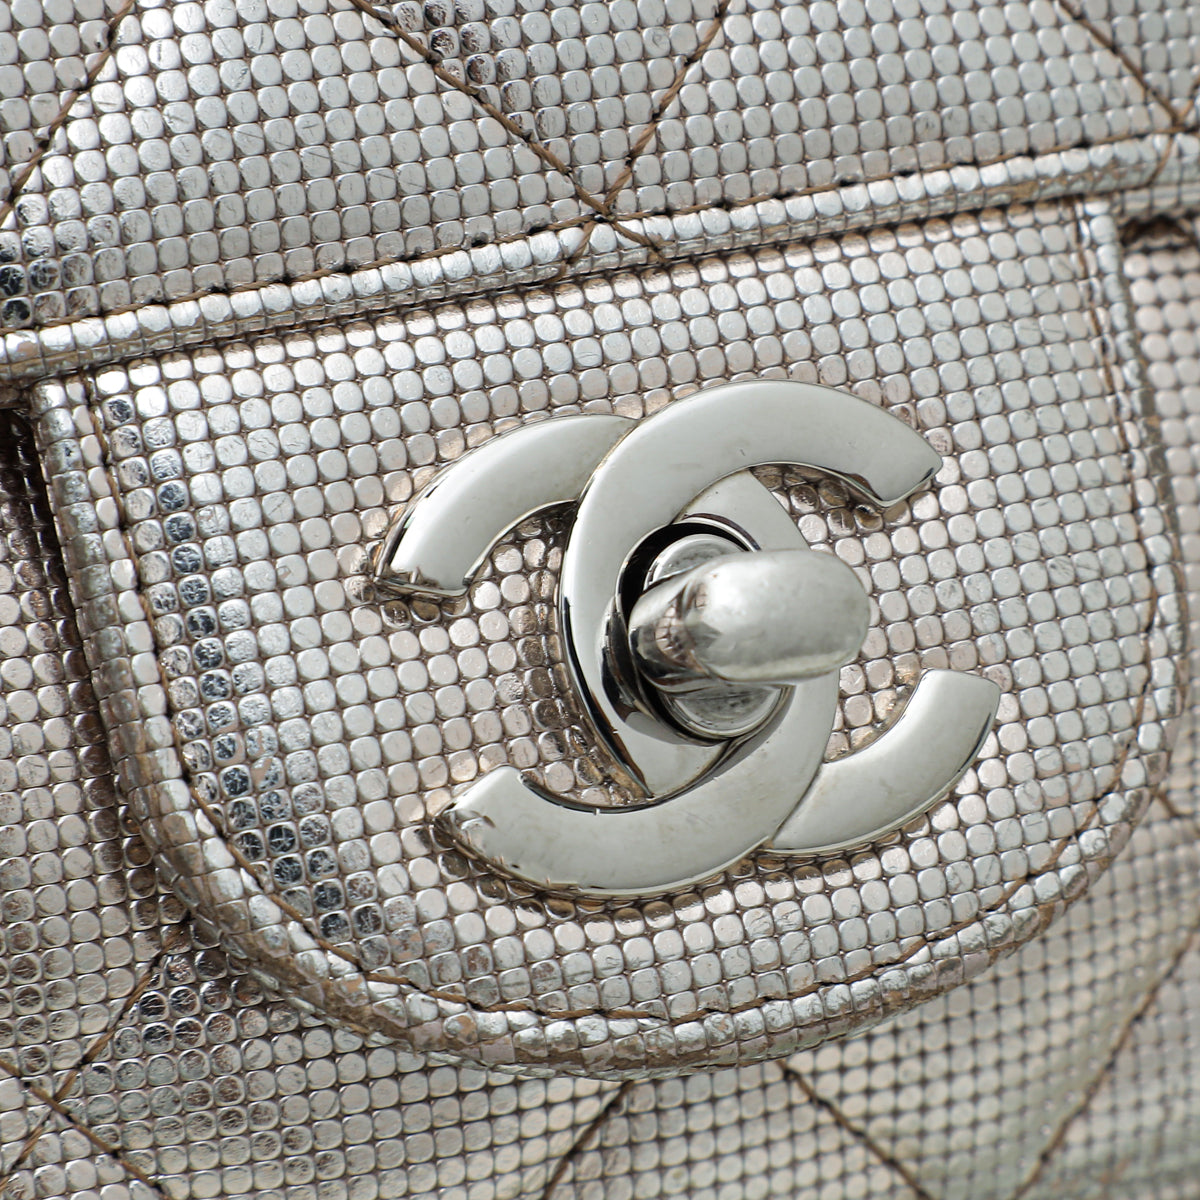 Chanel Metallic Silver Perforated Quilted Lambskin Timeless Clutch